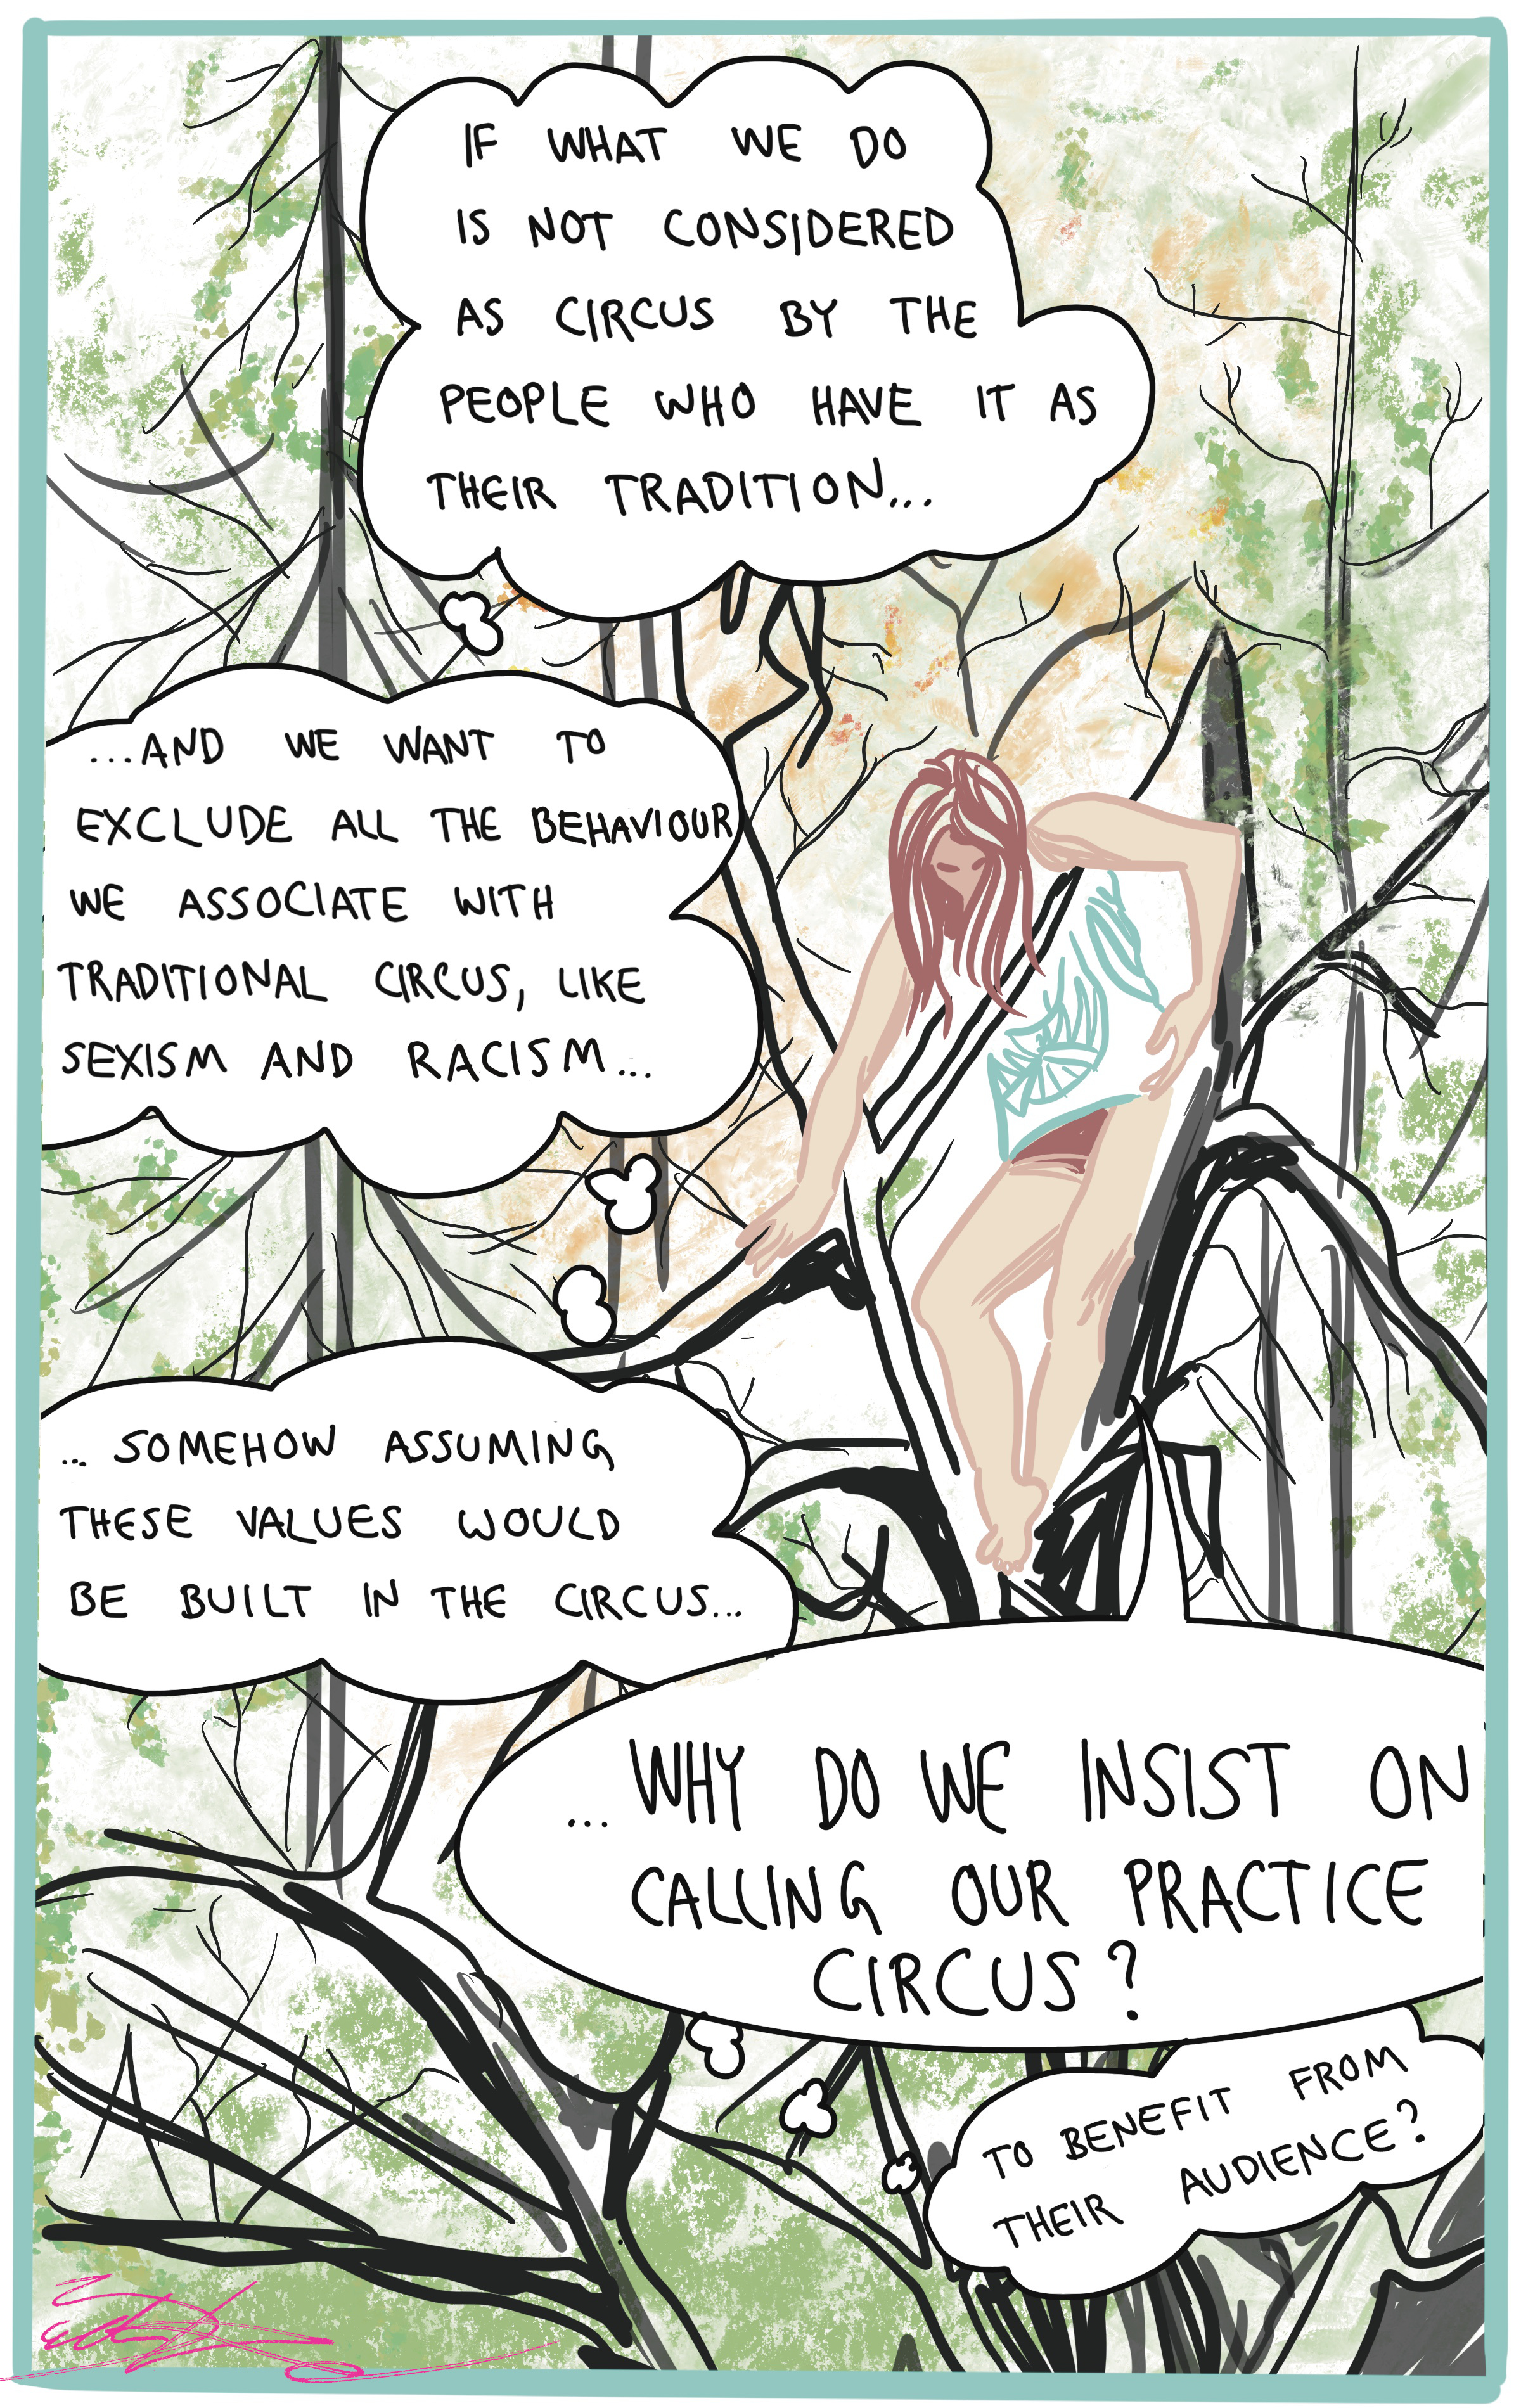 Eight illustration of the it’s not a game -series. In the picture an acrobat is doing movements in the forest, and her thoughts are visible in some thought bubbles. They read: If what we do is not considered as circus by the people who have it as their tradition, and we want to exclude all the behaviour we associate with traditional circus, like sexism and racism, somehow assuming these values would be built in the circus, why do we insist on calling our practice circus? To benefit from their audience?